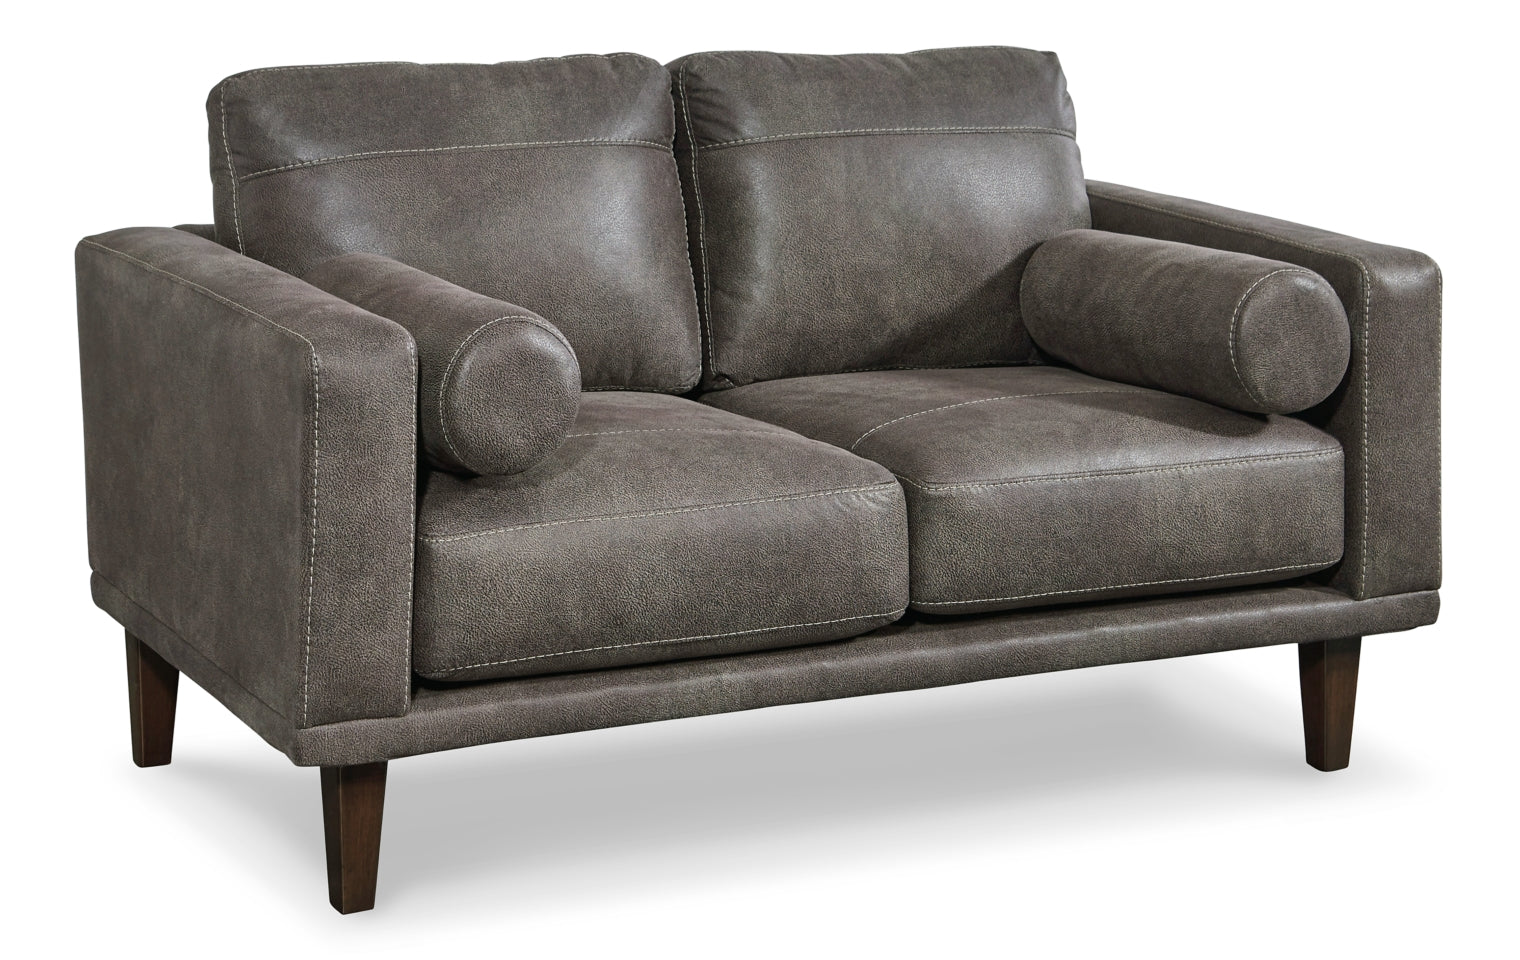 Arroyo Sofa, Loveseat and Chair